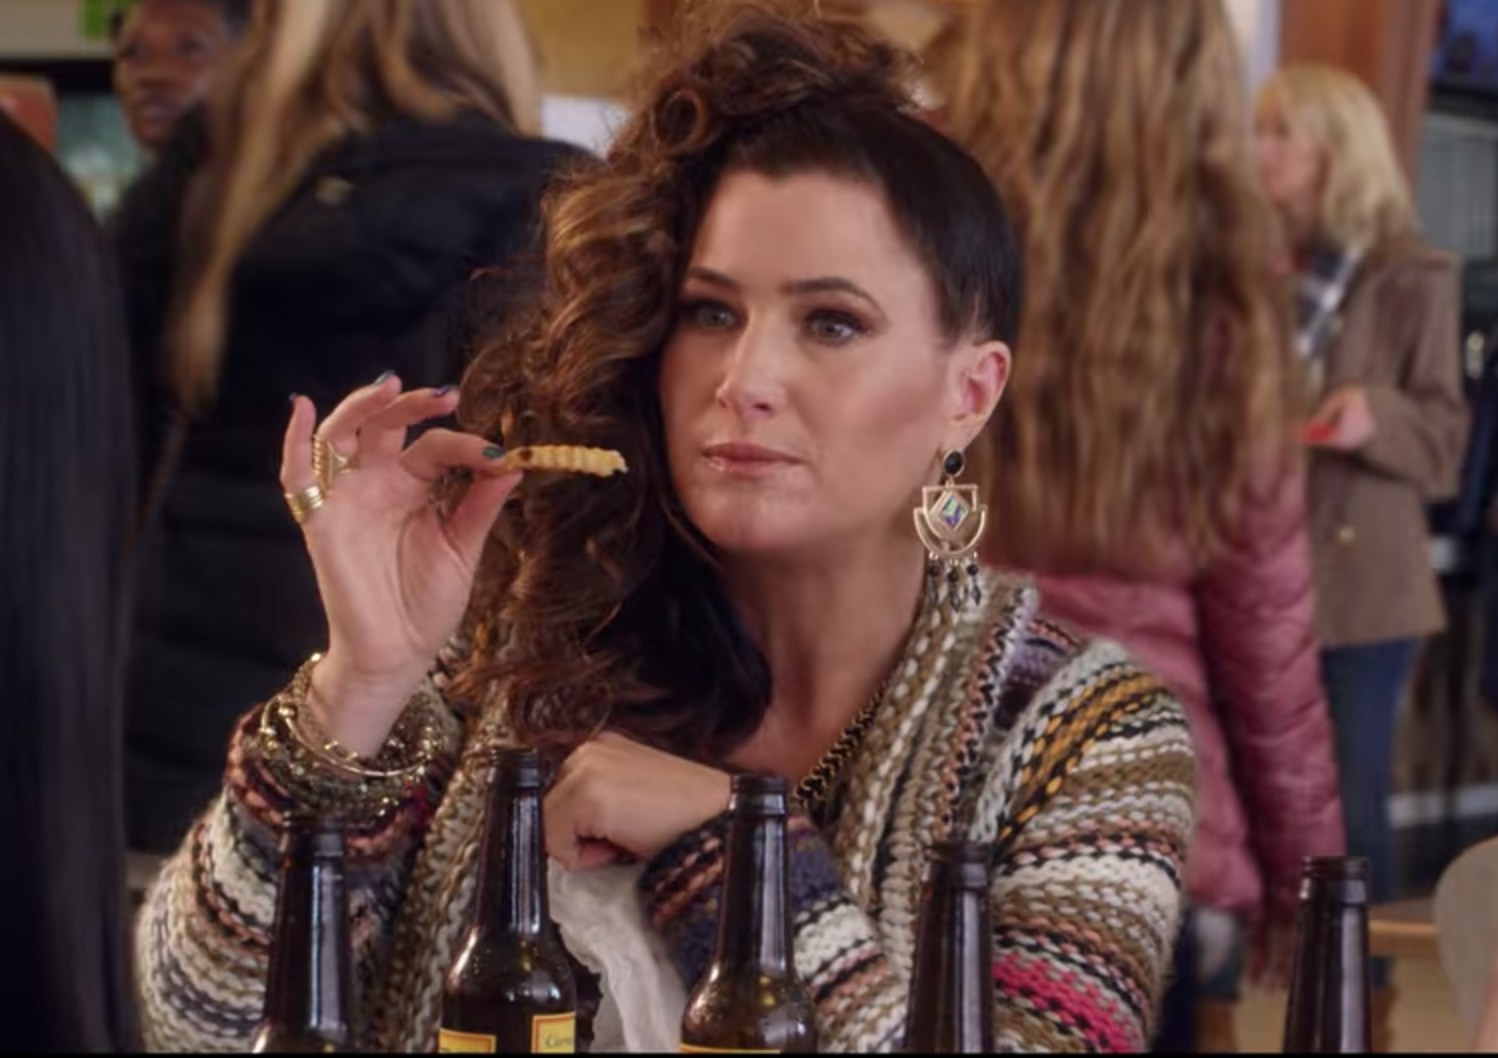 Hahn in a bad moms christmas